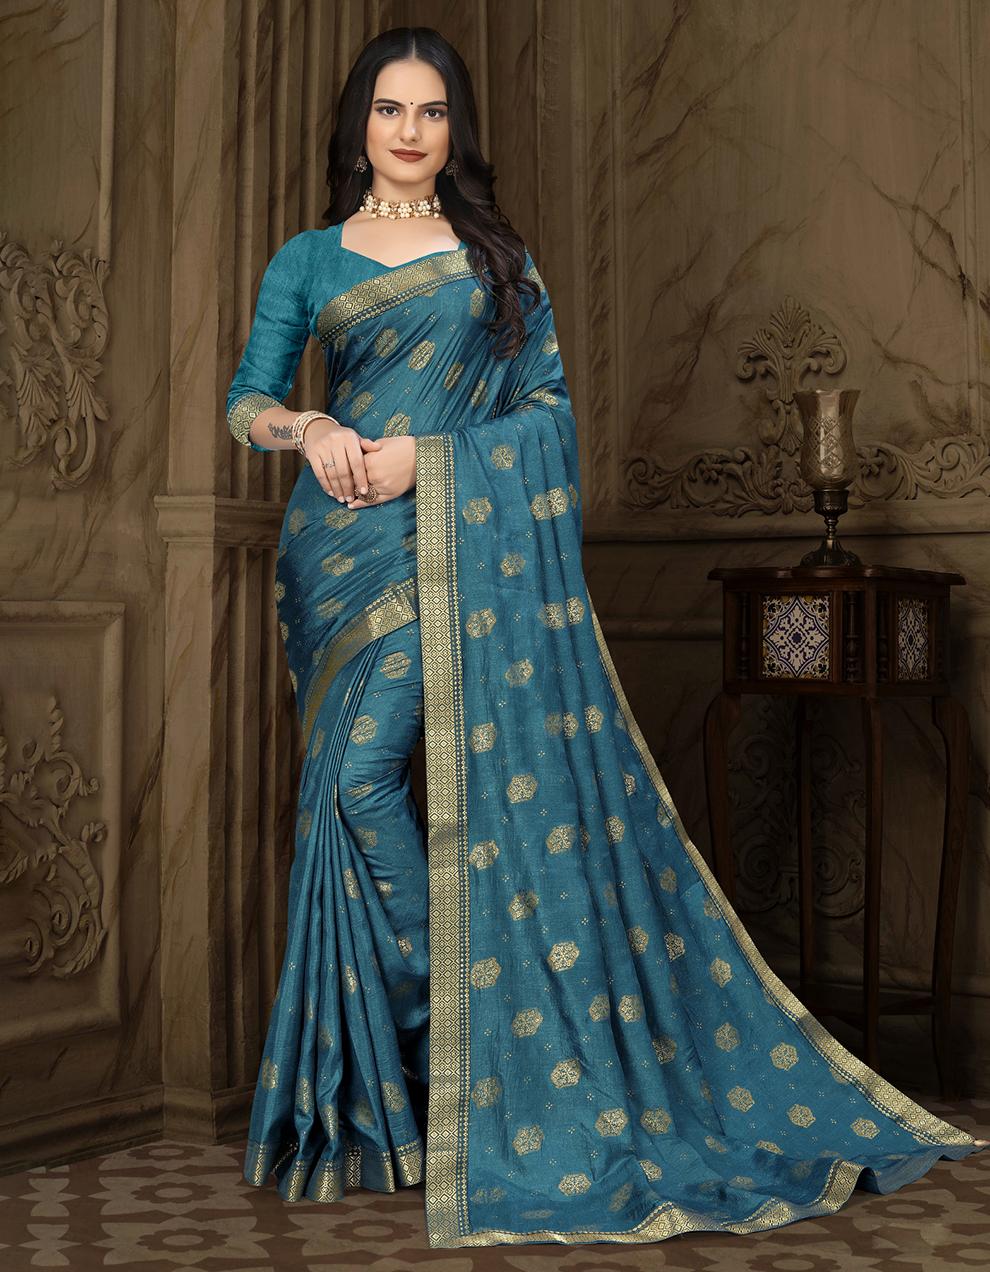 Teal Blue Vichitra Silk Saree With Blouse IW27027